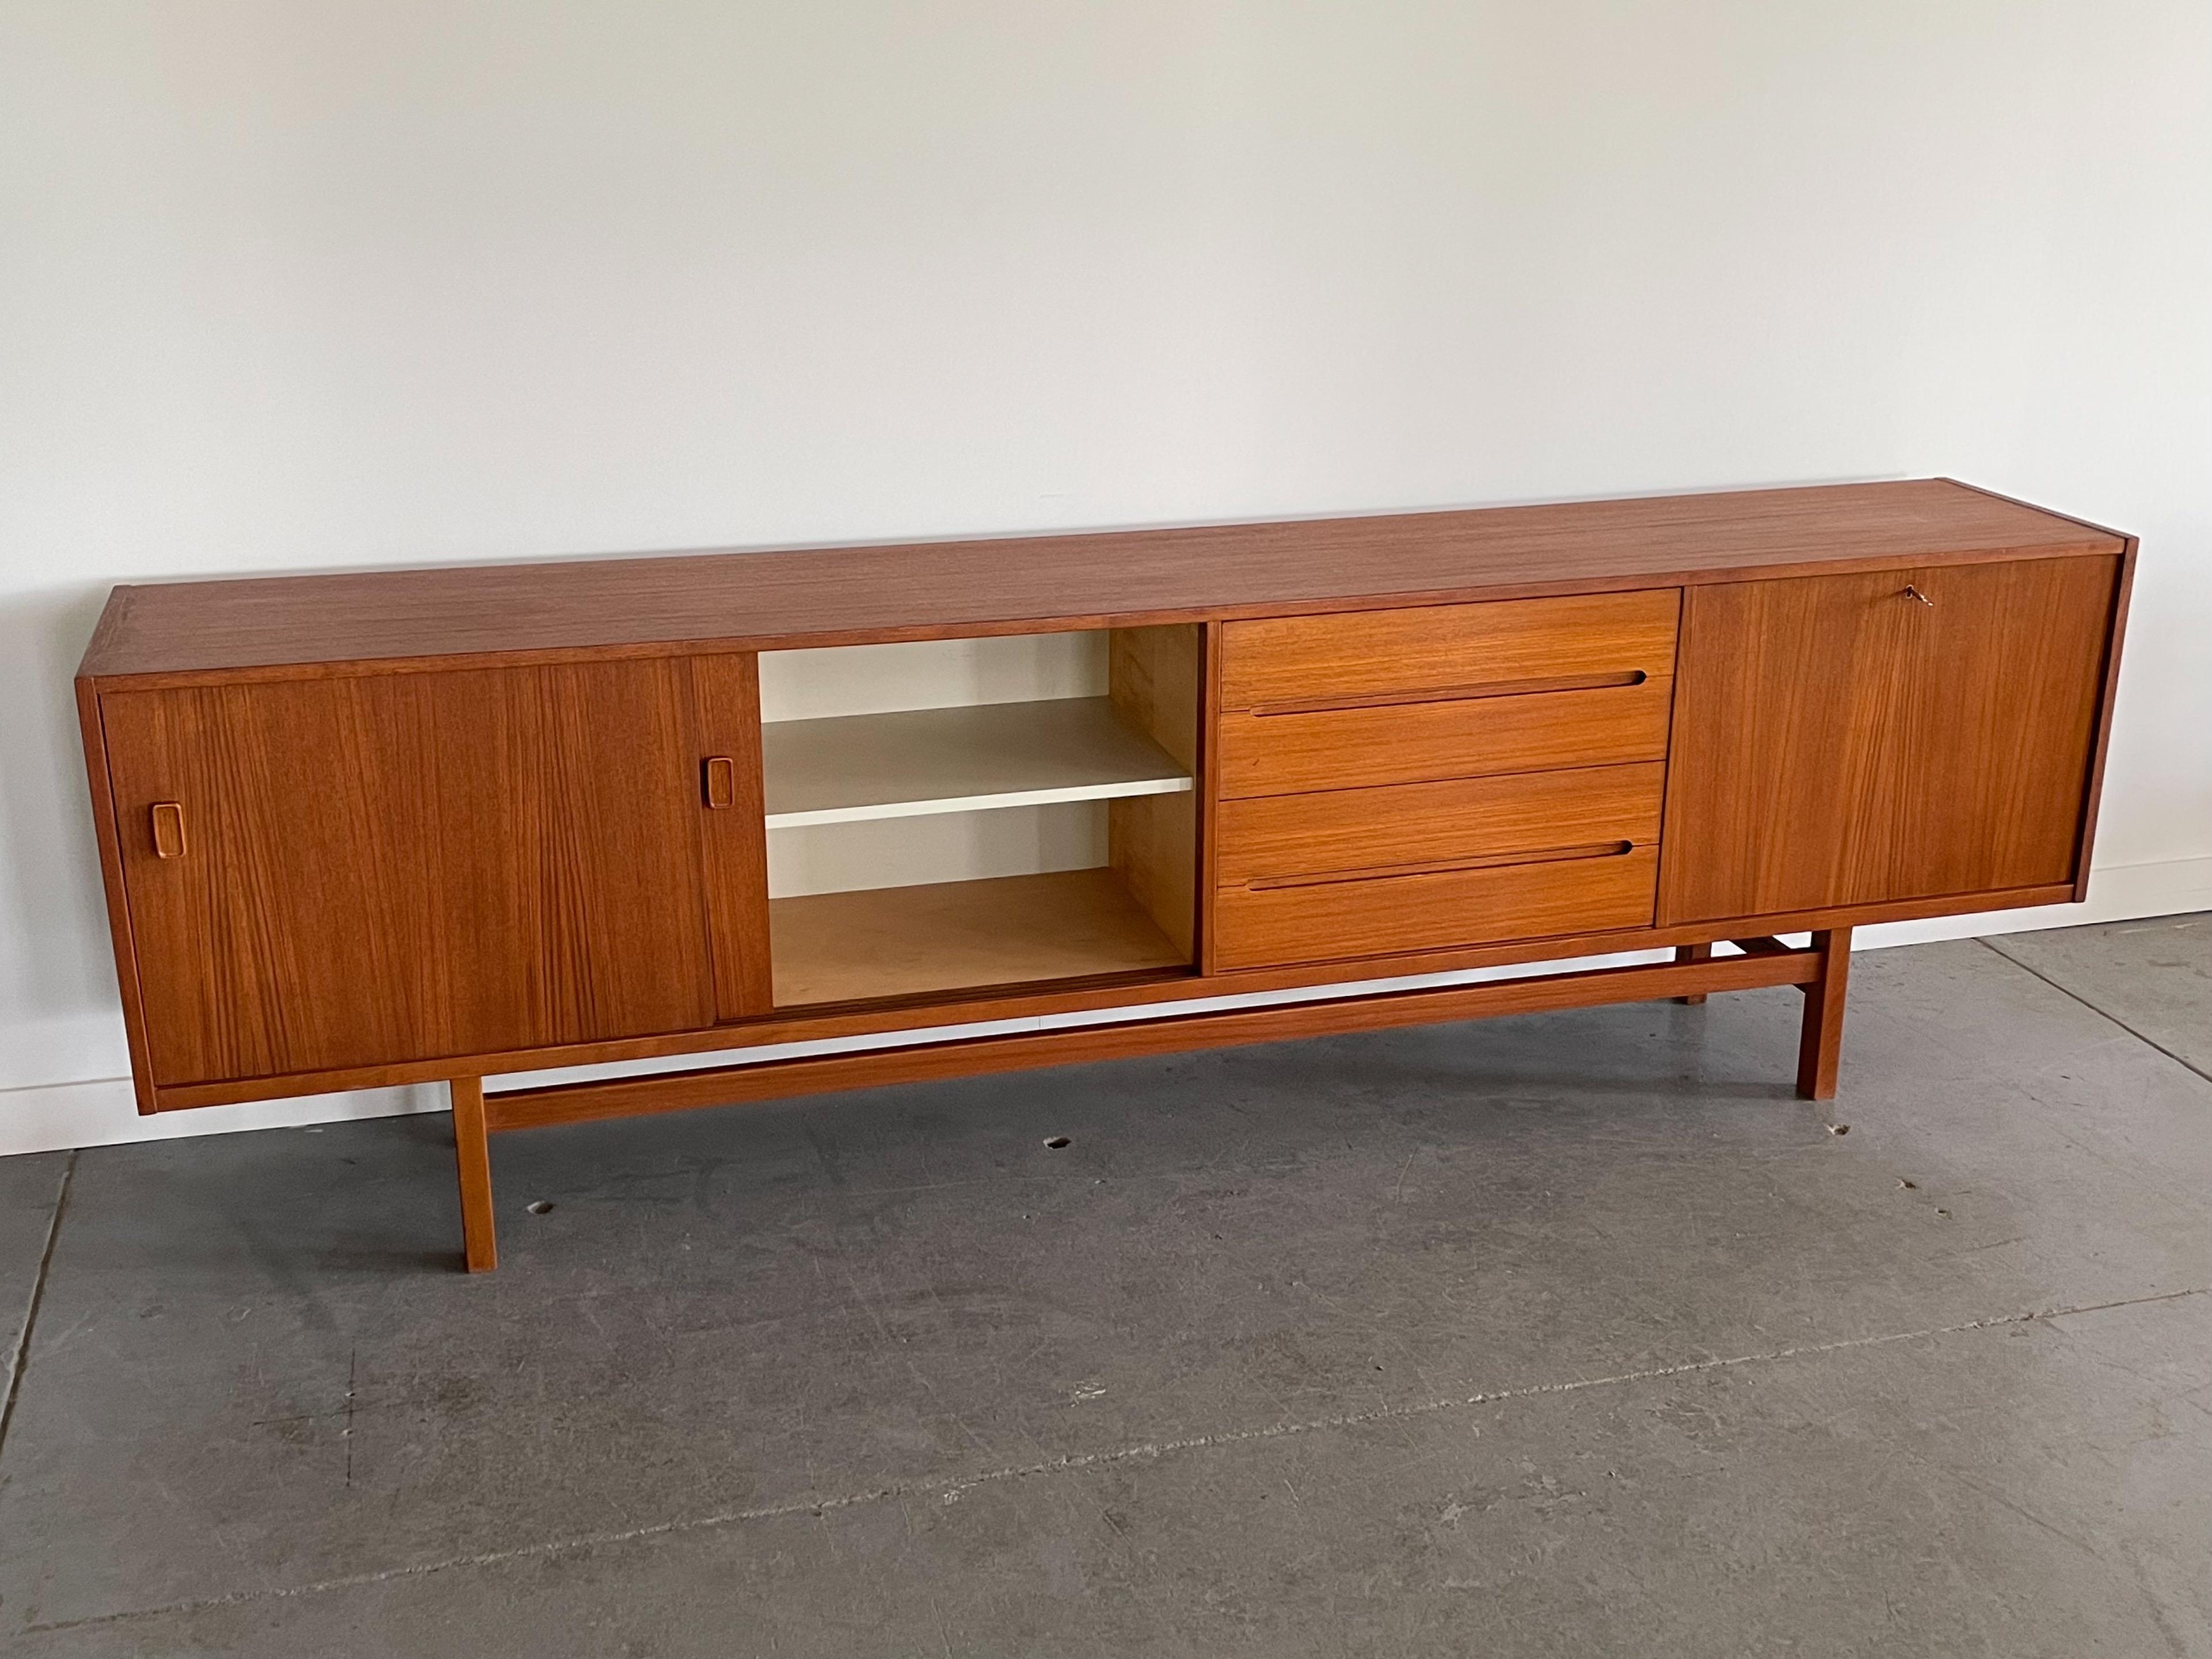 One of the largest storage pieces out there. This monumental teak ’Grand’ credenza by Nils Jonsson for Hugo Troeds, Sweden, offers a variety of ample storage options including shelves, drawers, and a drop-down bar cabinet. It features nicely